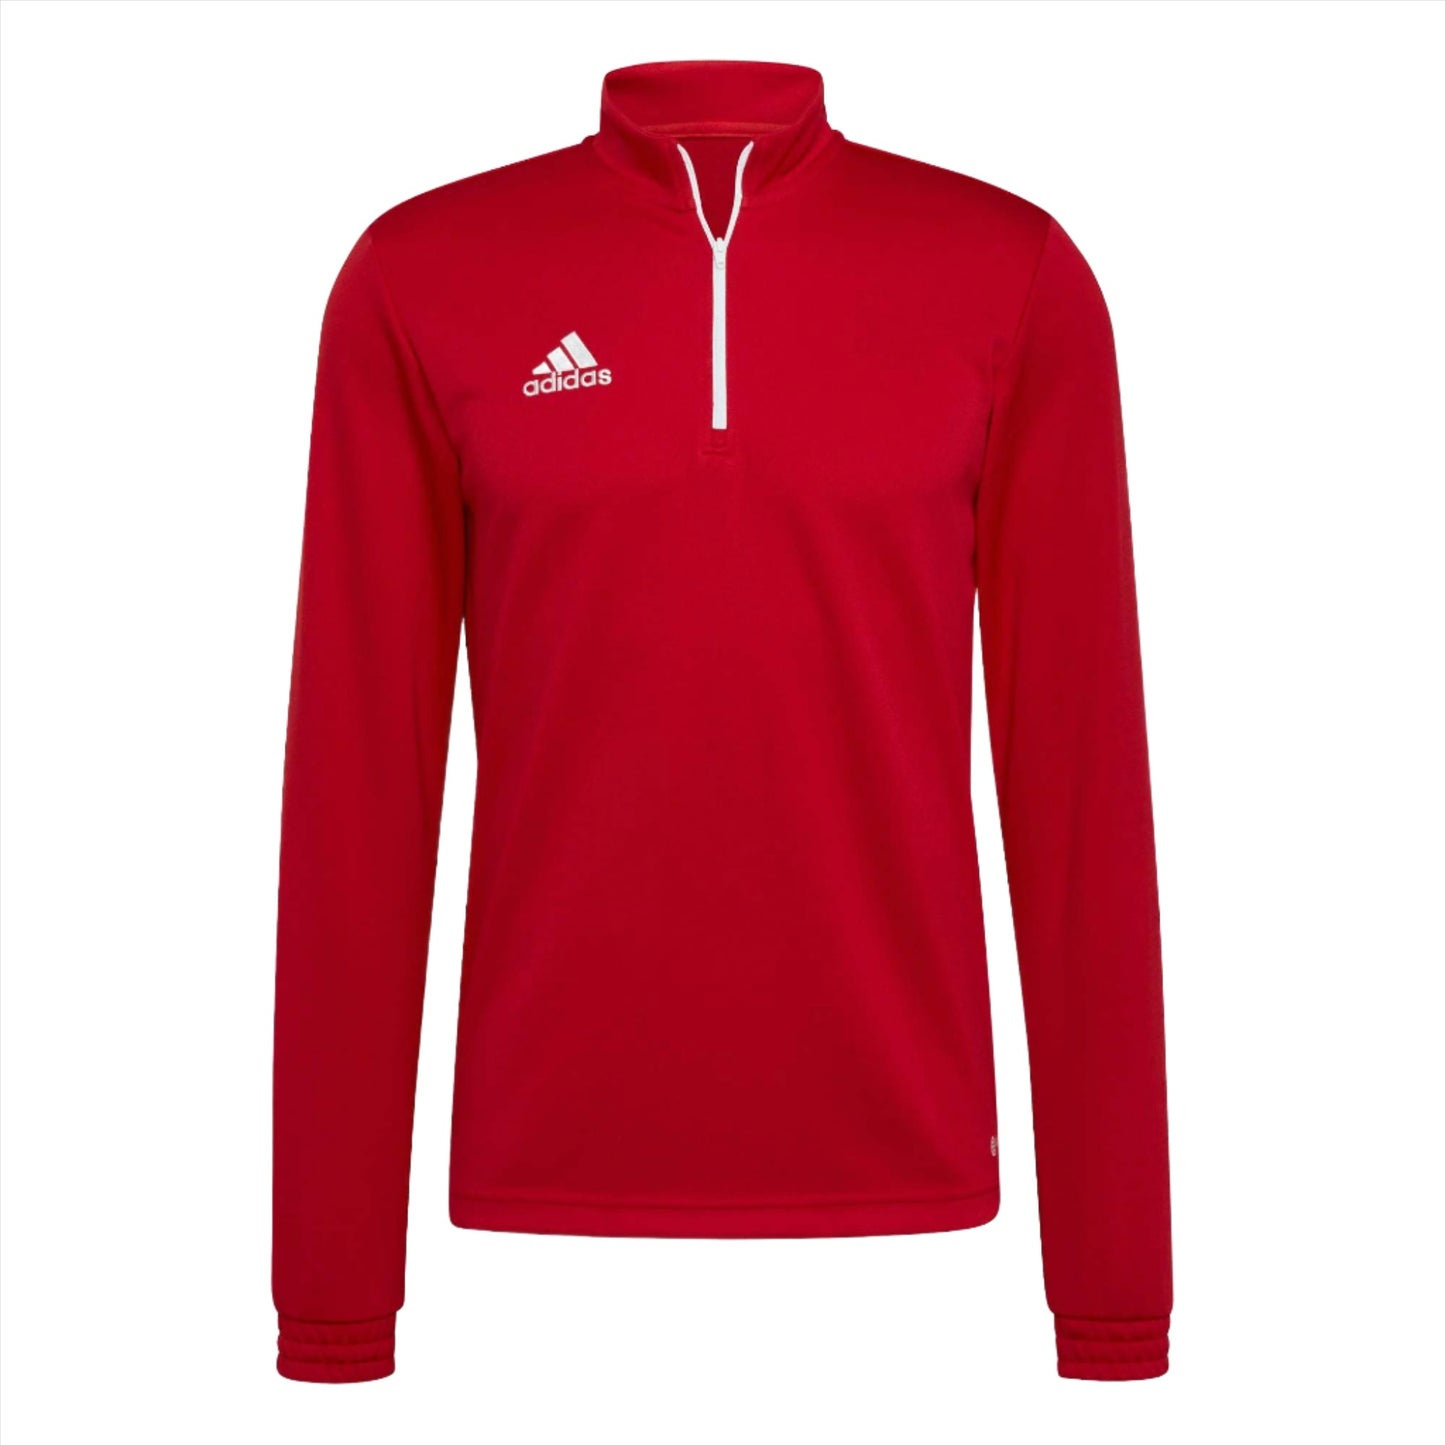 Entrada 22 Training Top by Adidas - The Luxury Promotional Gifts Company Limited